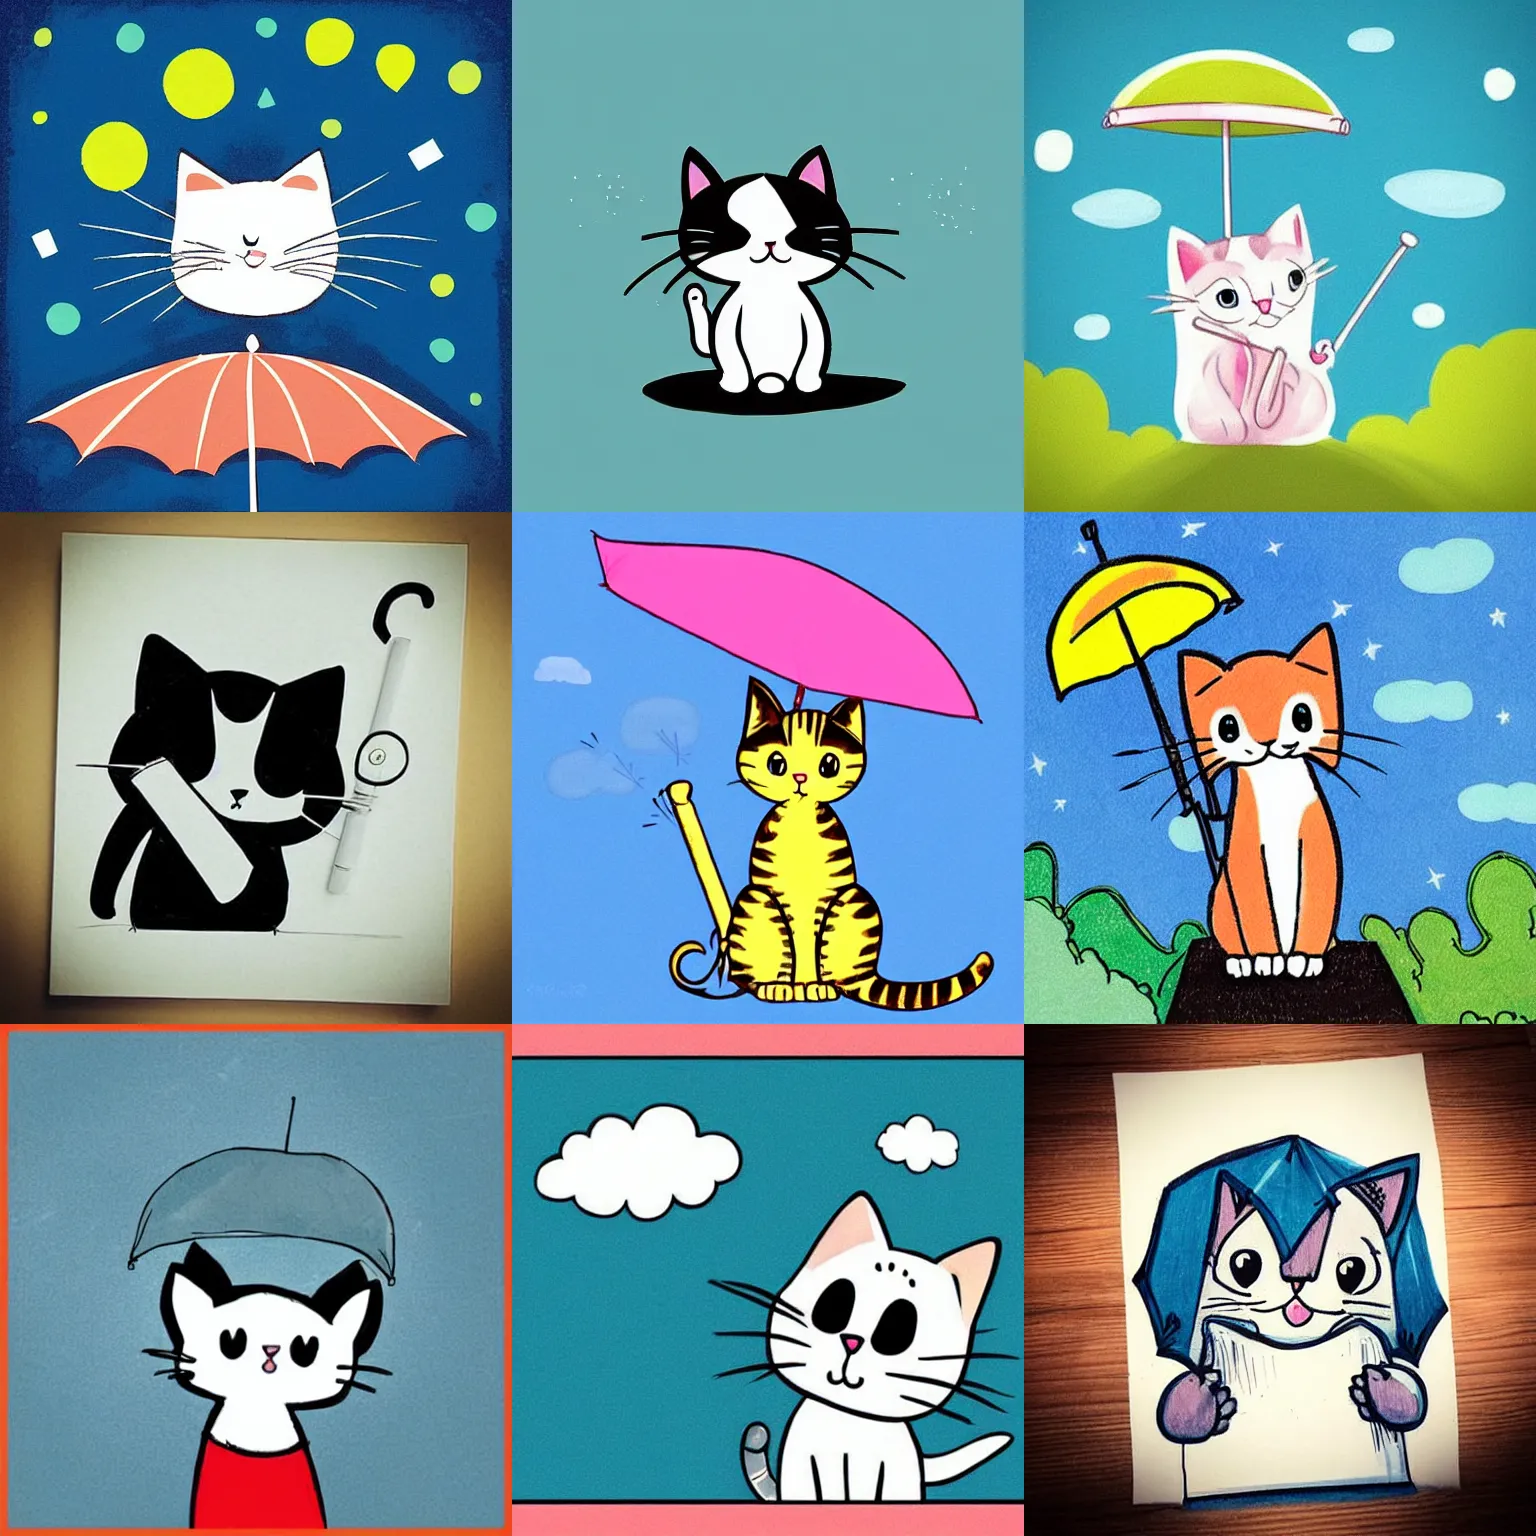 “Cute cartoon kitty holding an umbrella looking up at | Stable ...